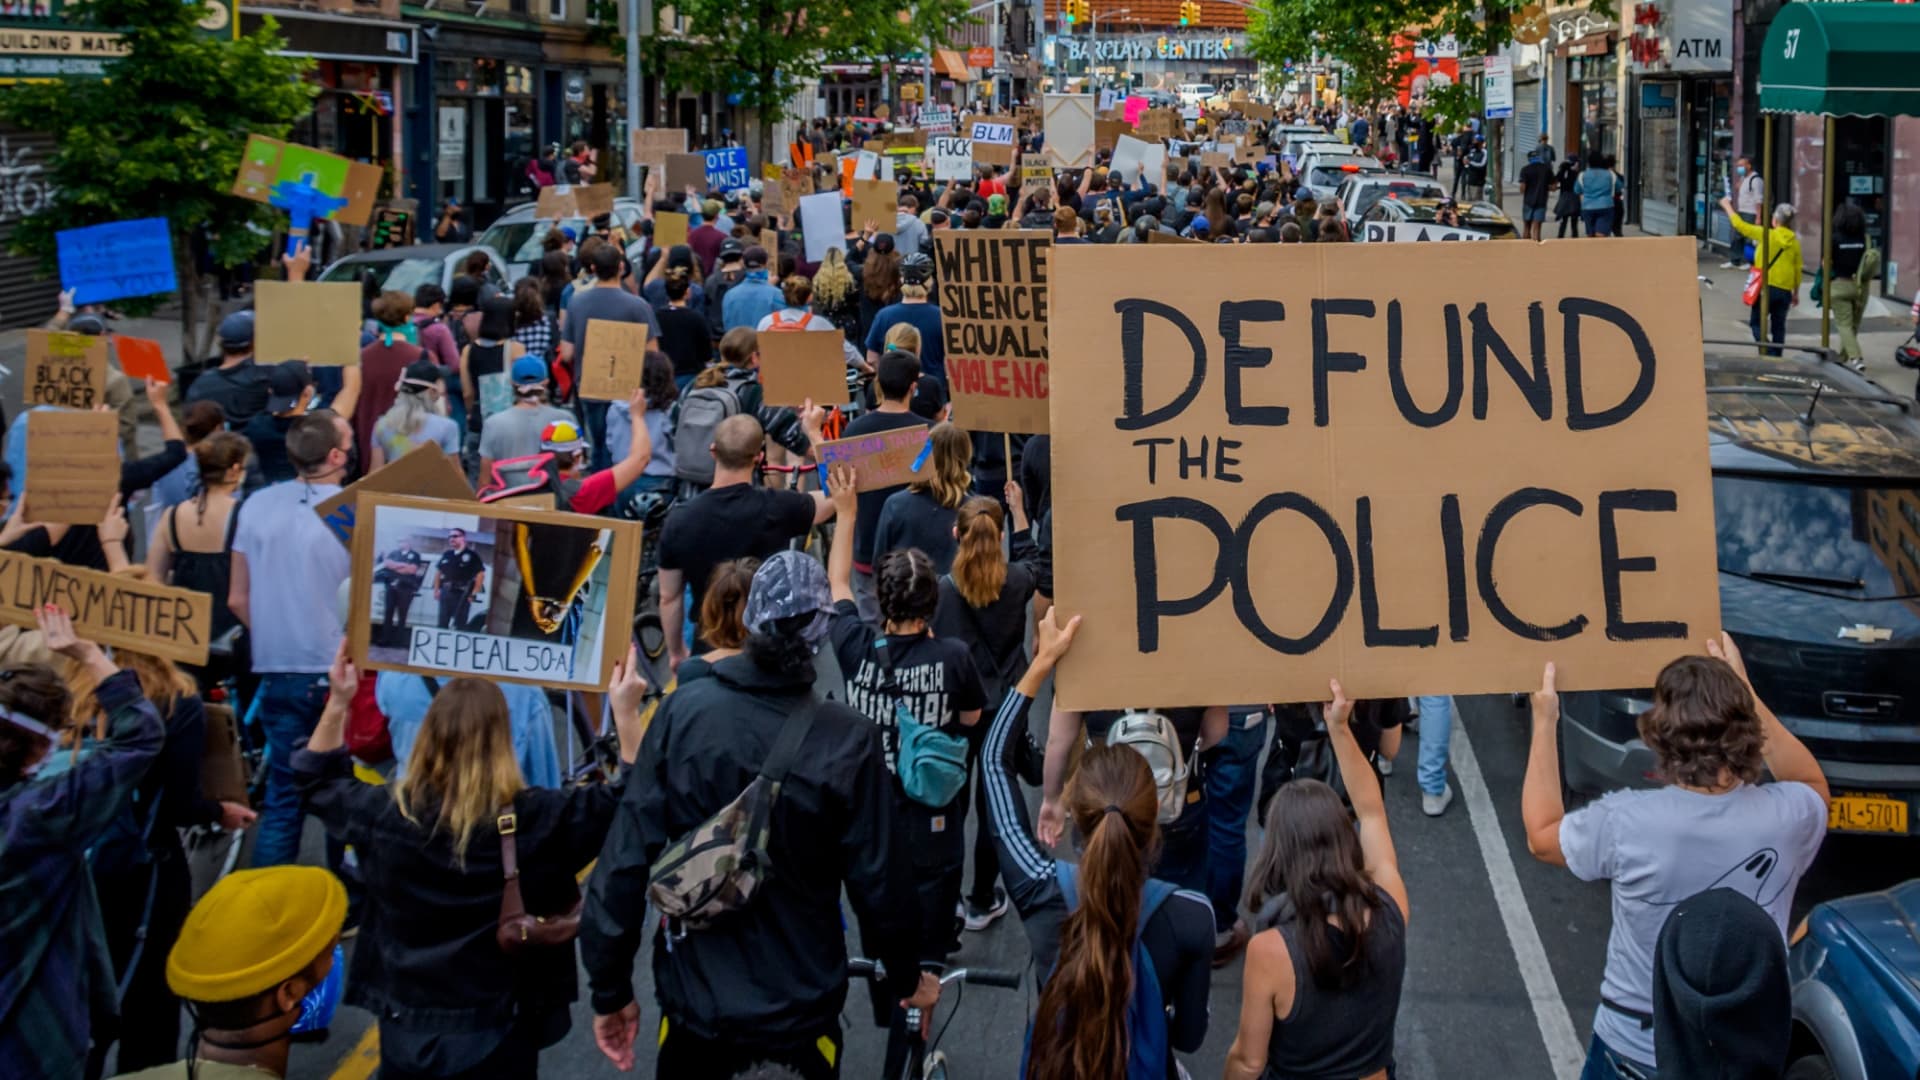 A participant holding a Defund The Police sign at the protest. Thousands of protesters filled the streets of Brooklyn in a massive march to demand justice for George Floyd, killed by Officer Derek Chauvin and to make a loud call for the defunding of the police force.